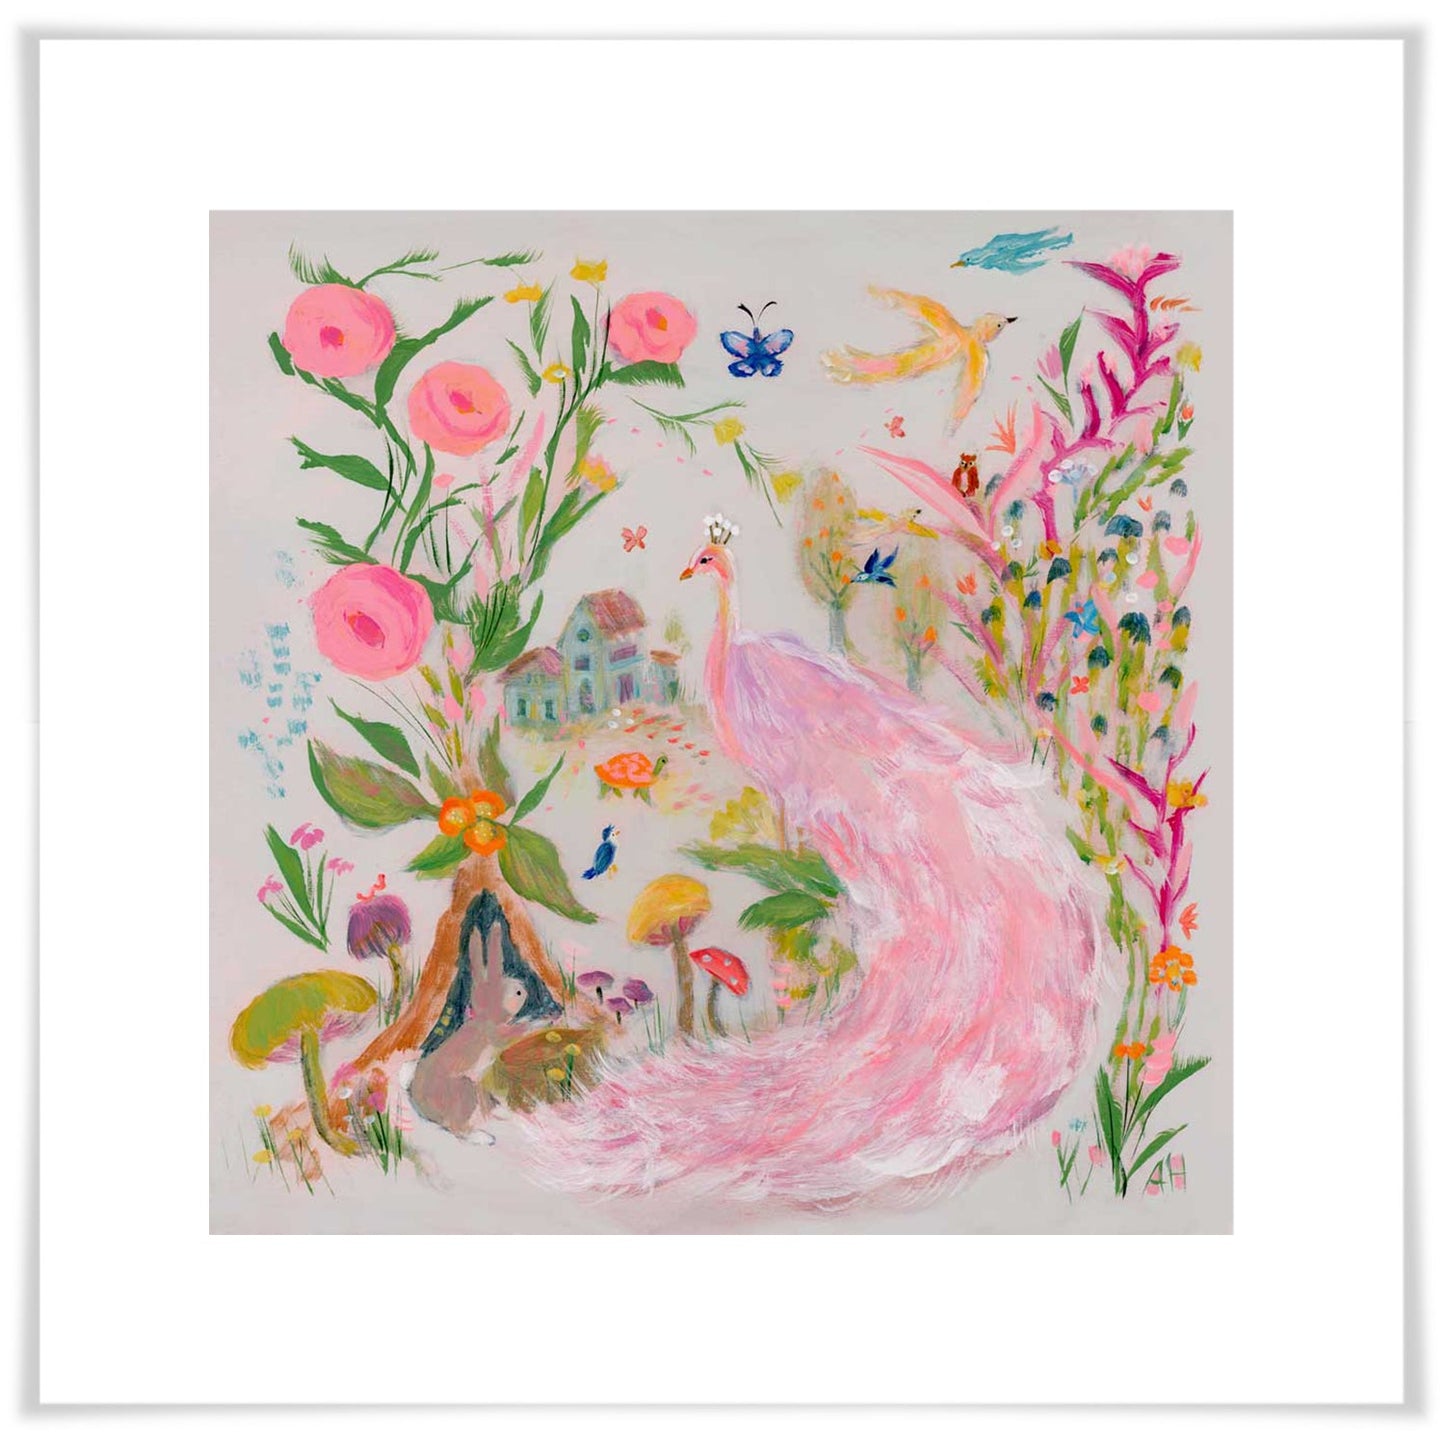 Ethereal Pink Peacock Art Prints